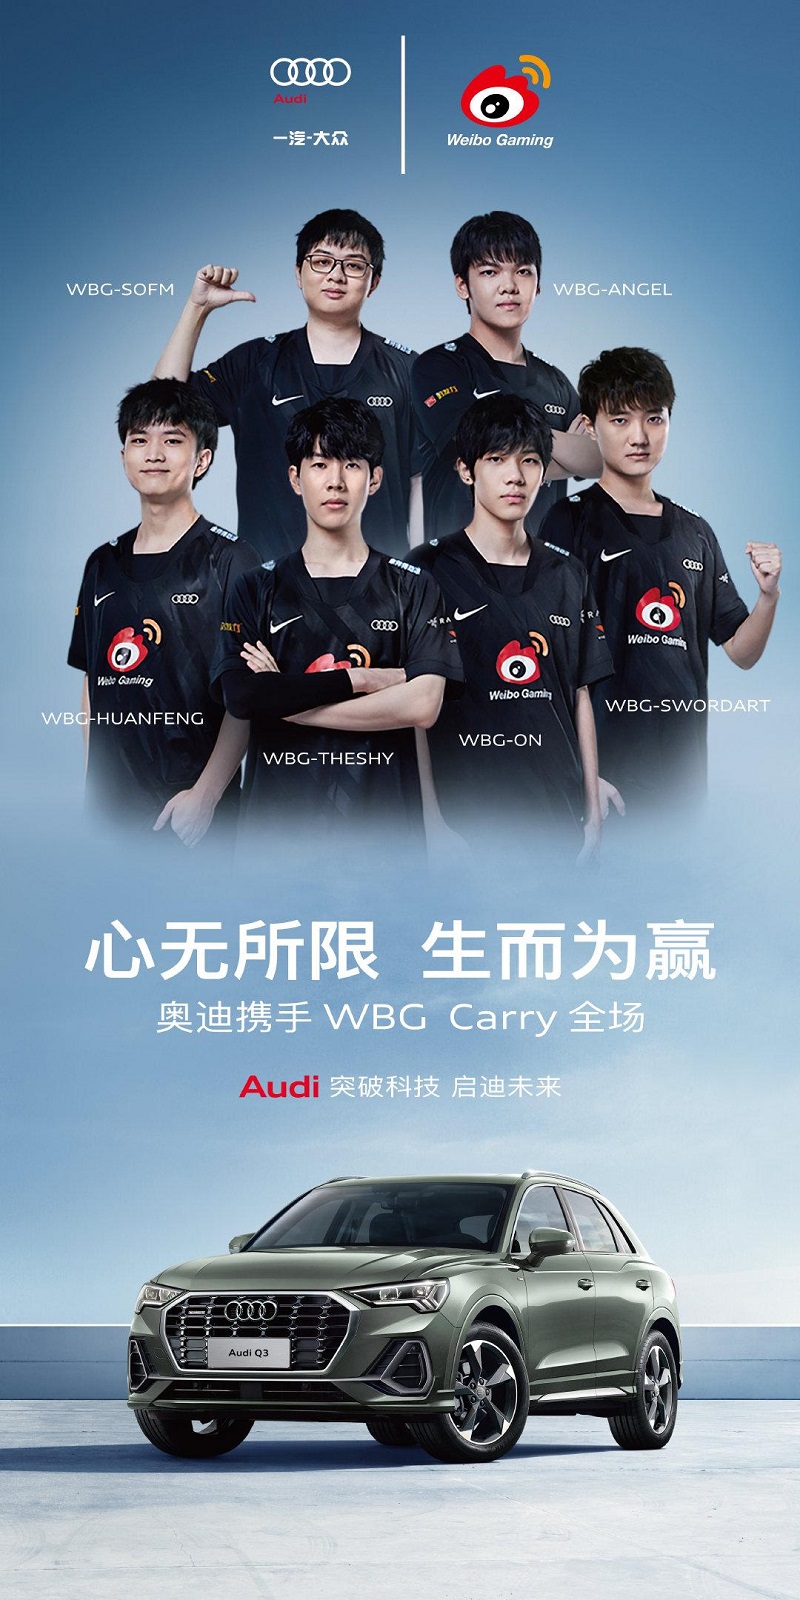 LPL Summer 2022: WBG has officially changed its name to Weibo FAW Audi Gaming